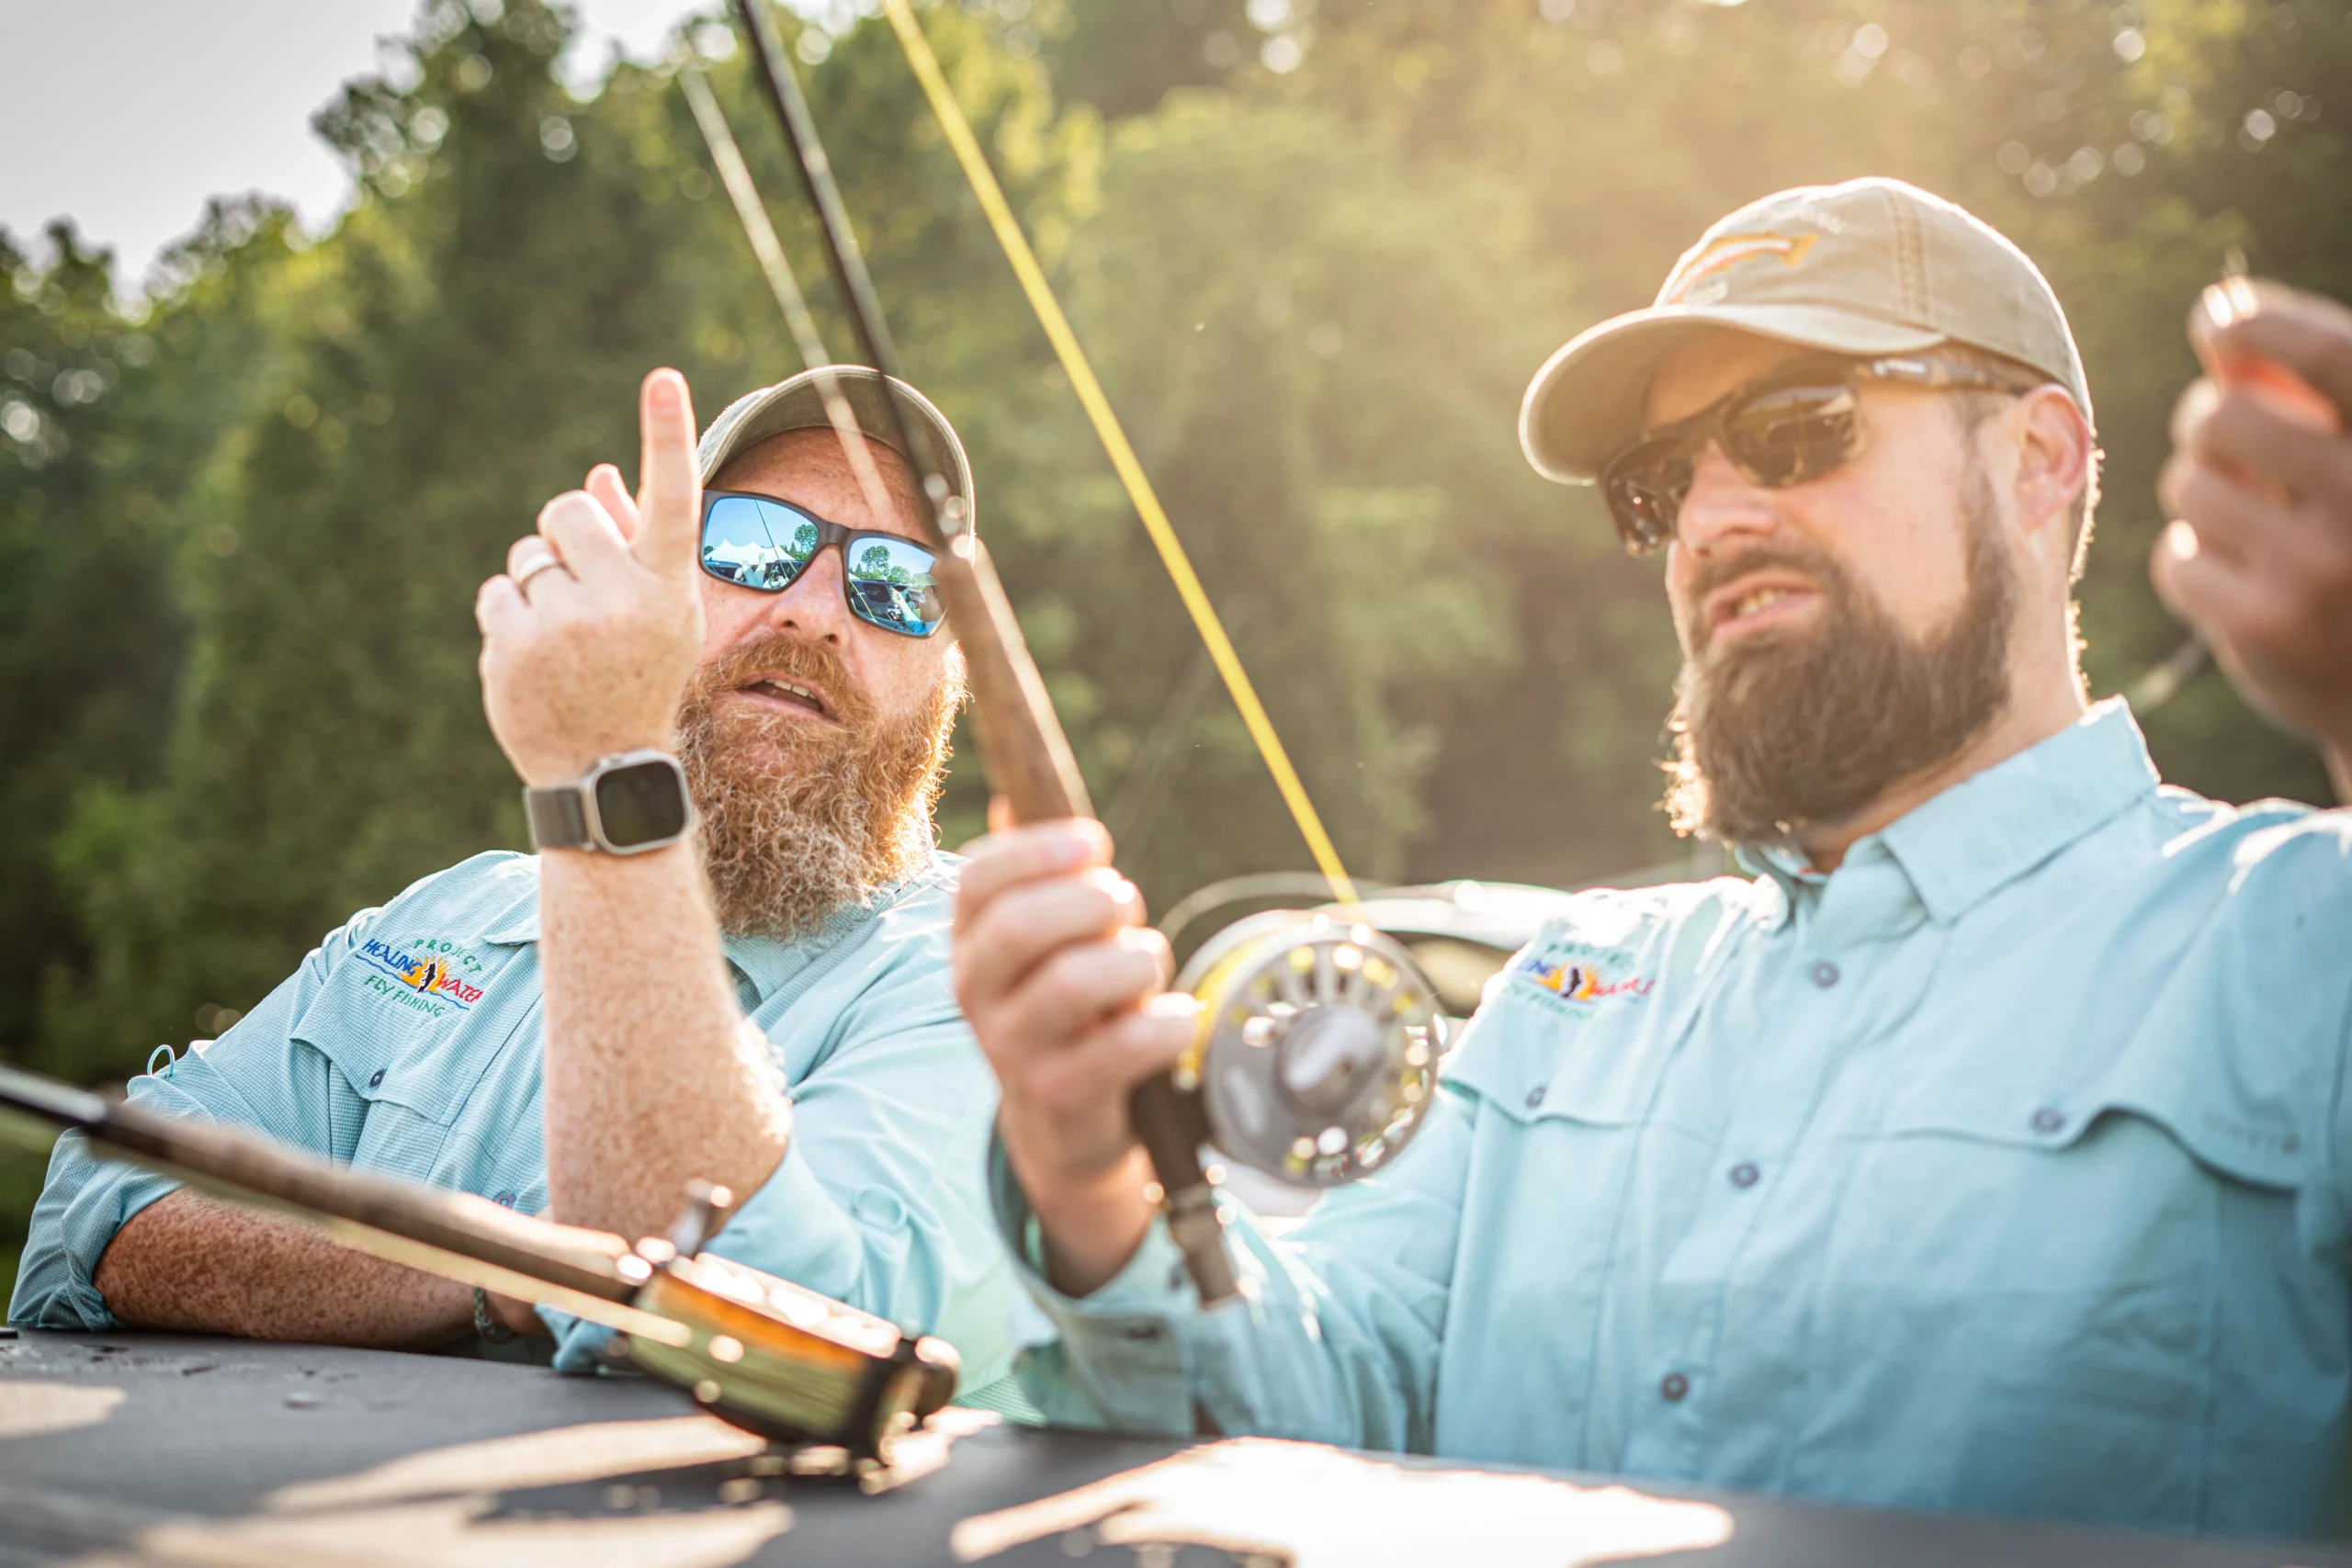 Fly-fishing programs catch on as therapy for troops and veterans